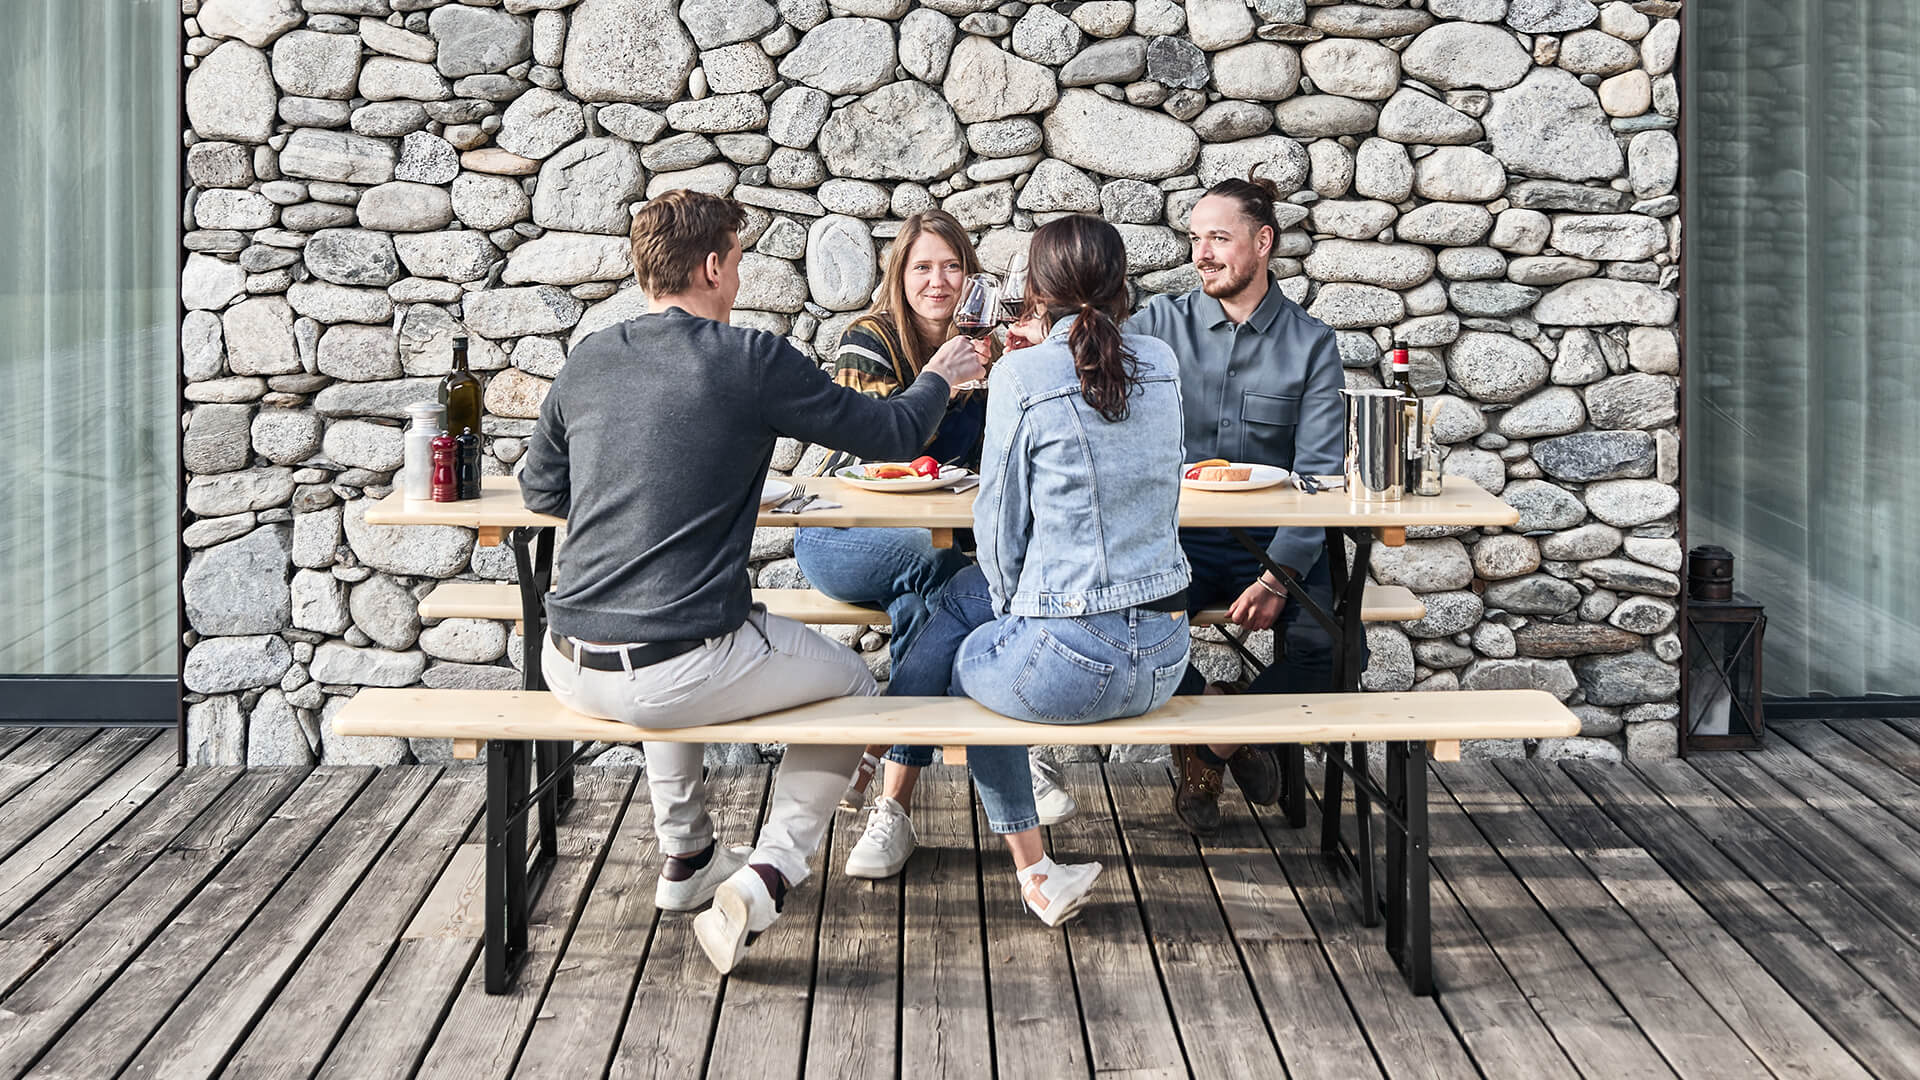 On a terrace 4 people enjoy your meal comfortably on the classic beer garden table set in nature